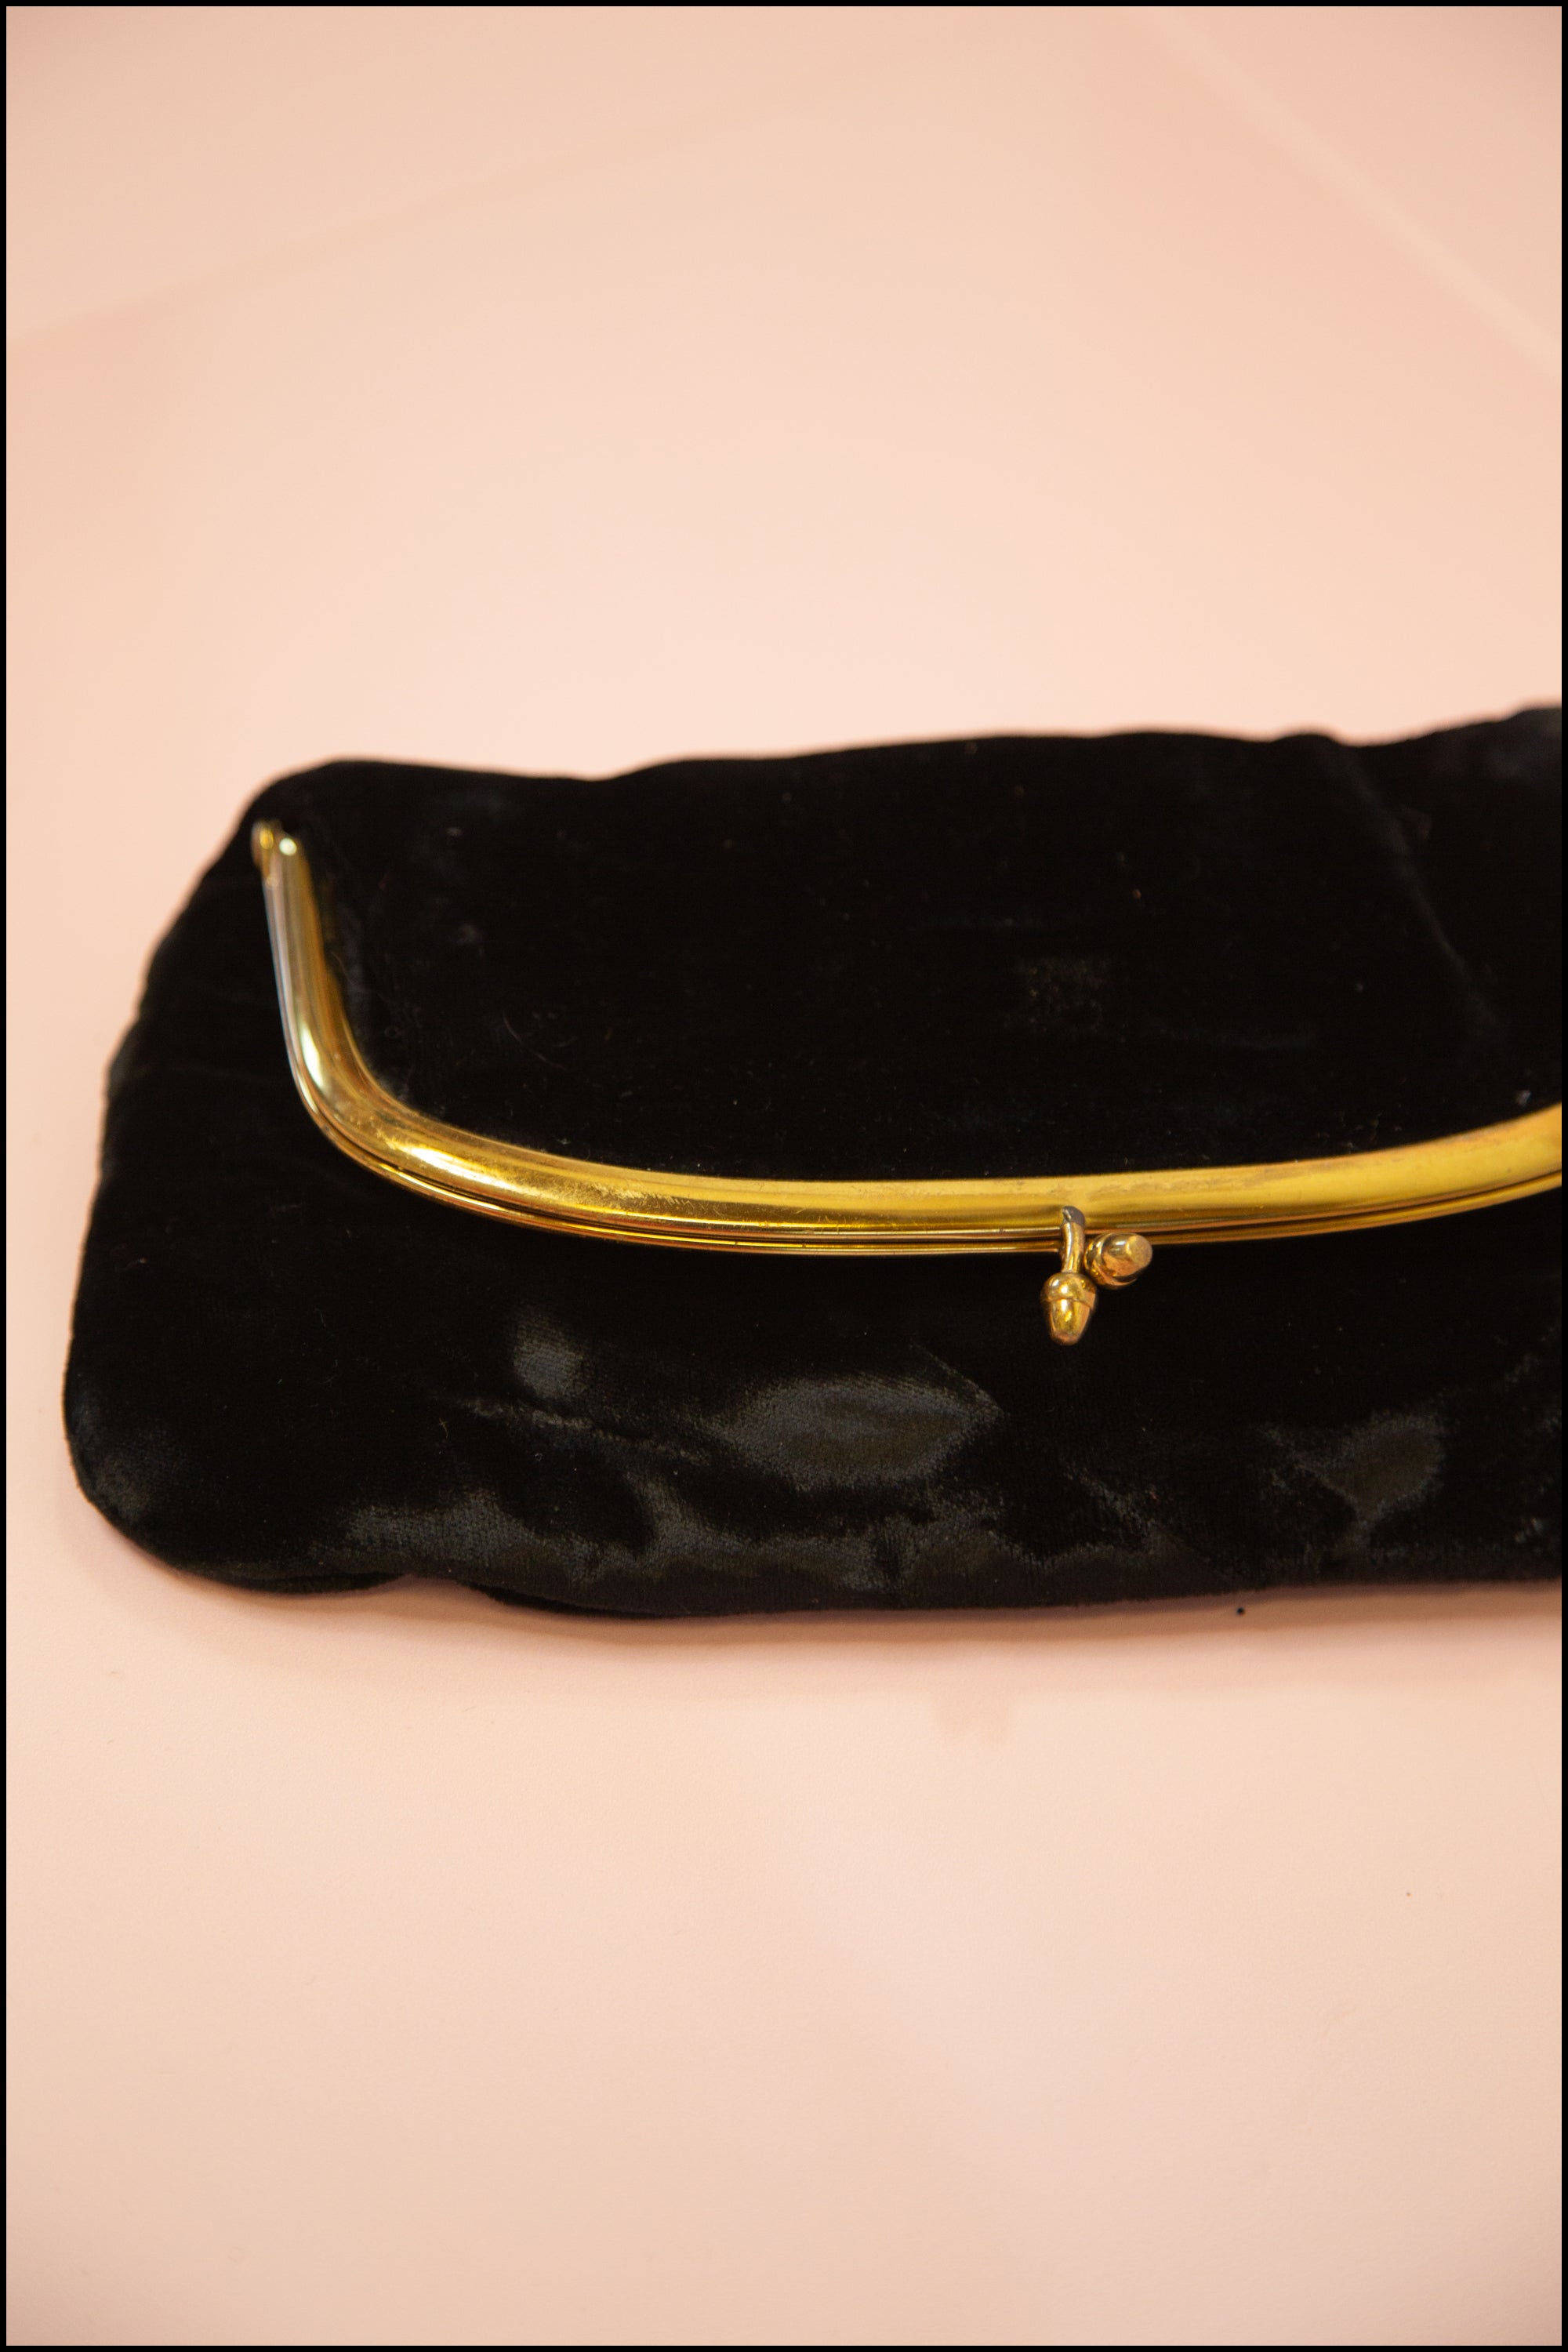 Purse With Flap Closure - 1,503 For Sale on 1stDibs